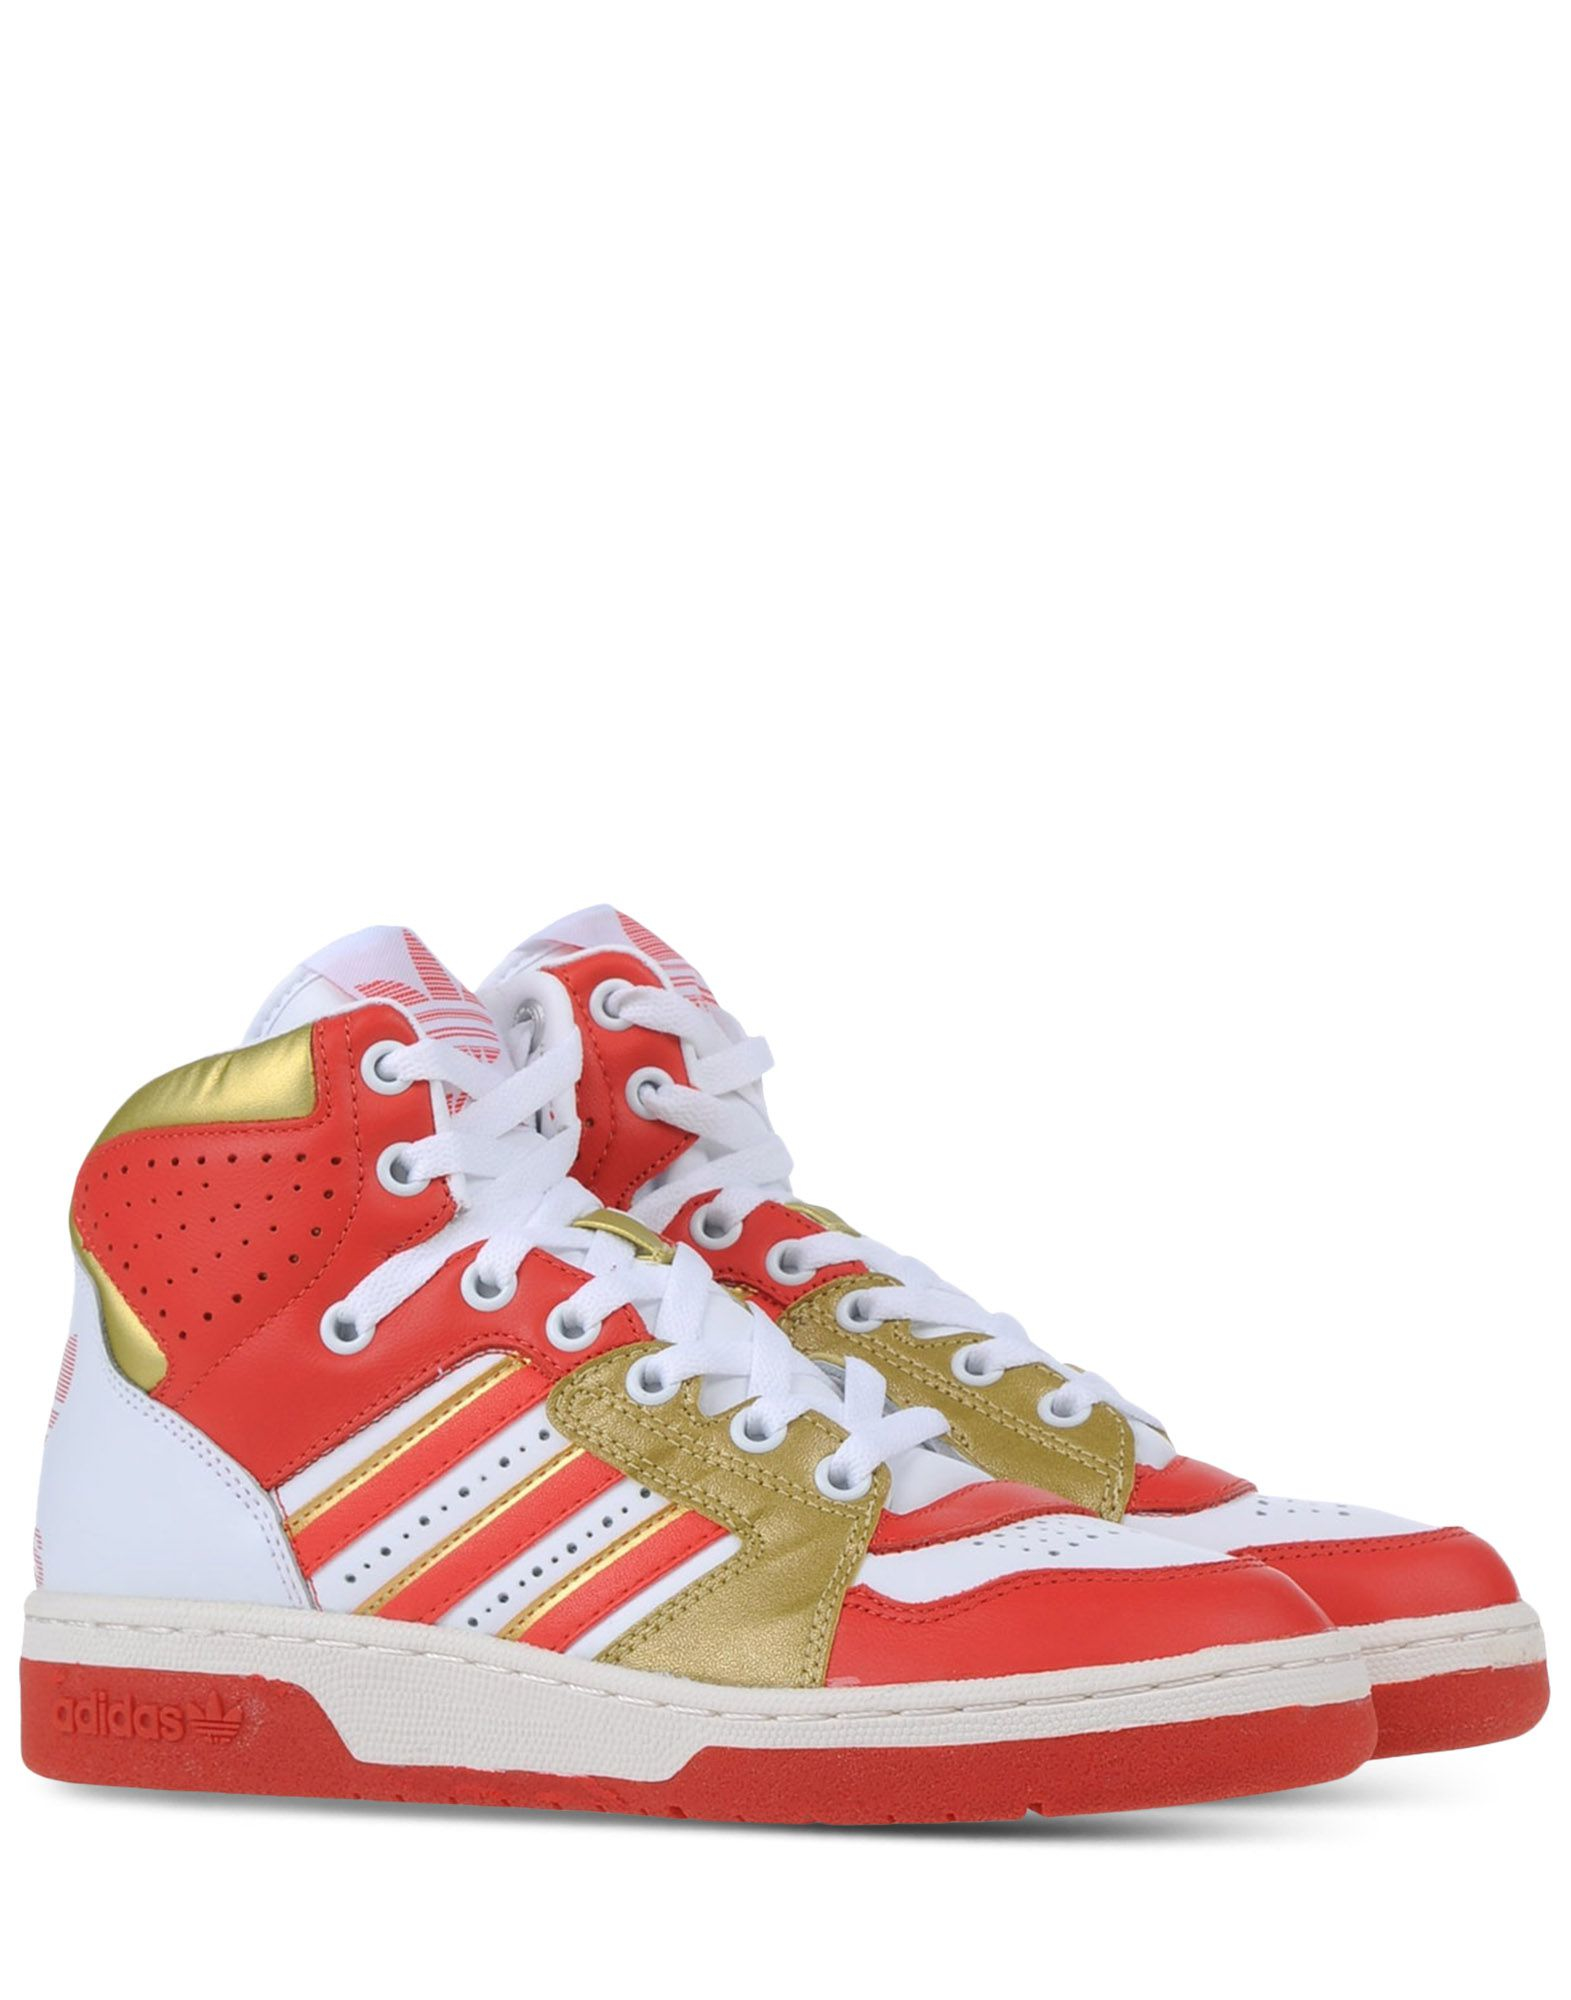 Adidas originals High-tops & Trainers in Red | Lyst